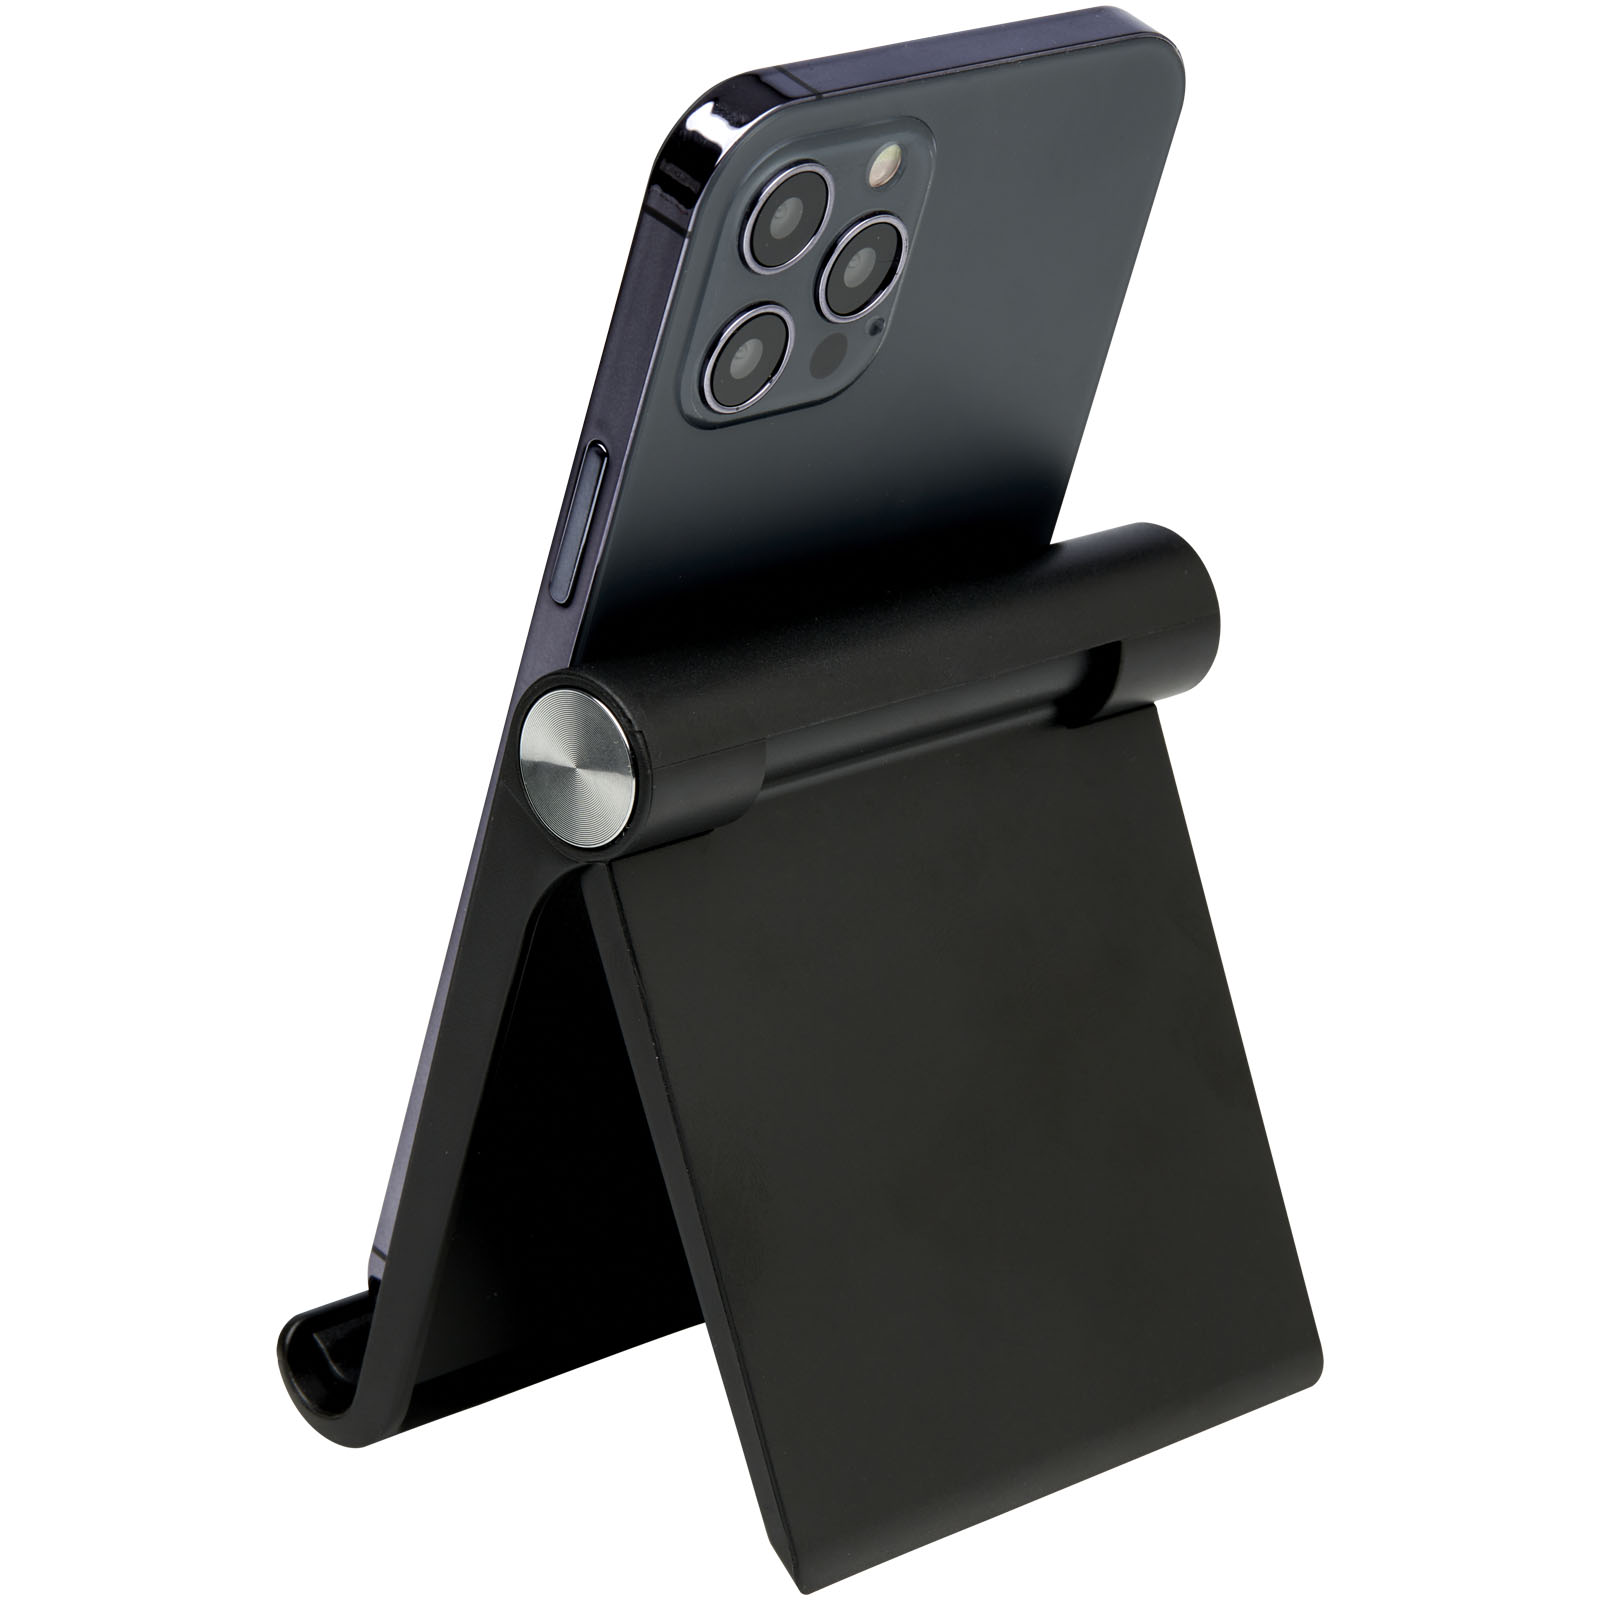 Advertising Stands & Holders - Resty phone and tablet stand - 5